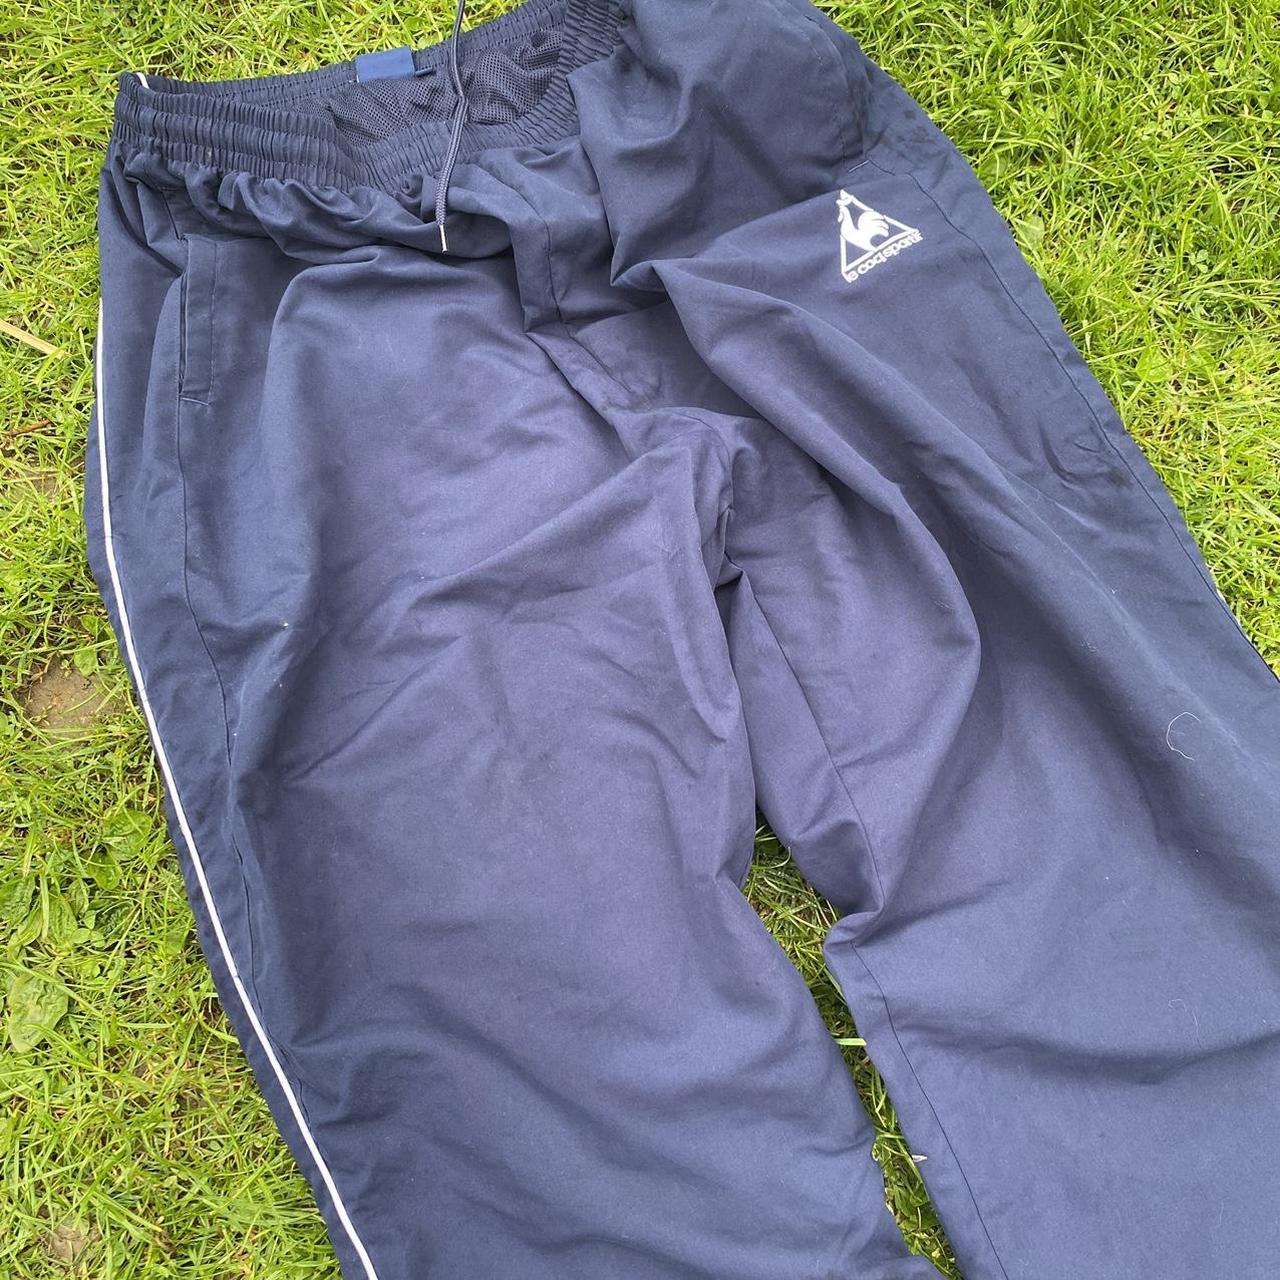 Le Coq Sportif Men's Navy and White Joggers-tracksuits | Depop